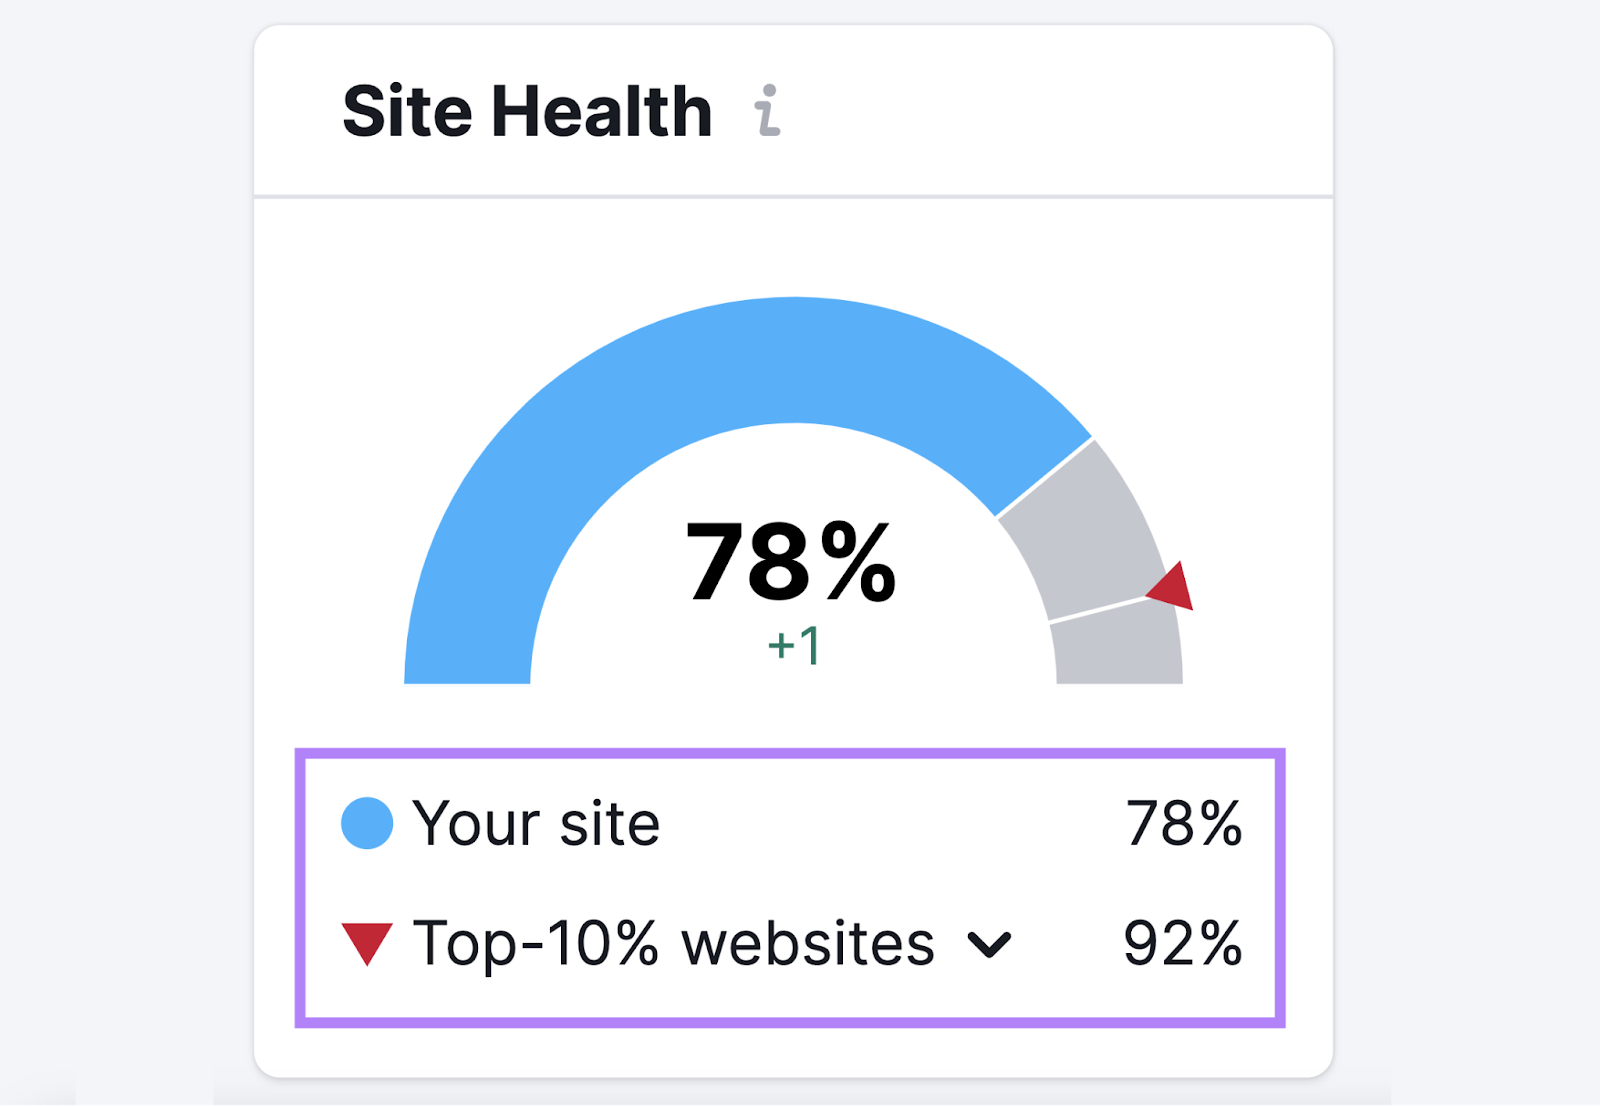 "Site Health" metric showing "78%" for a given domain